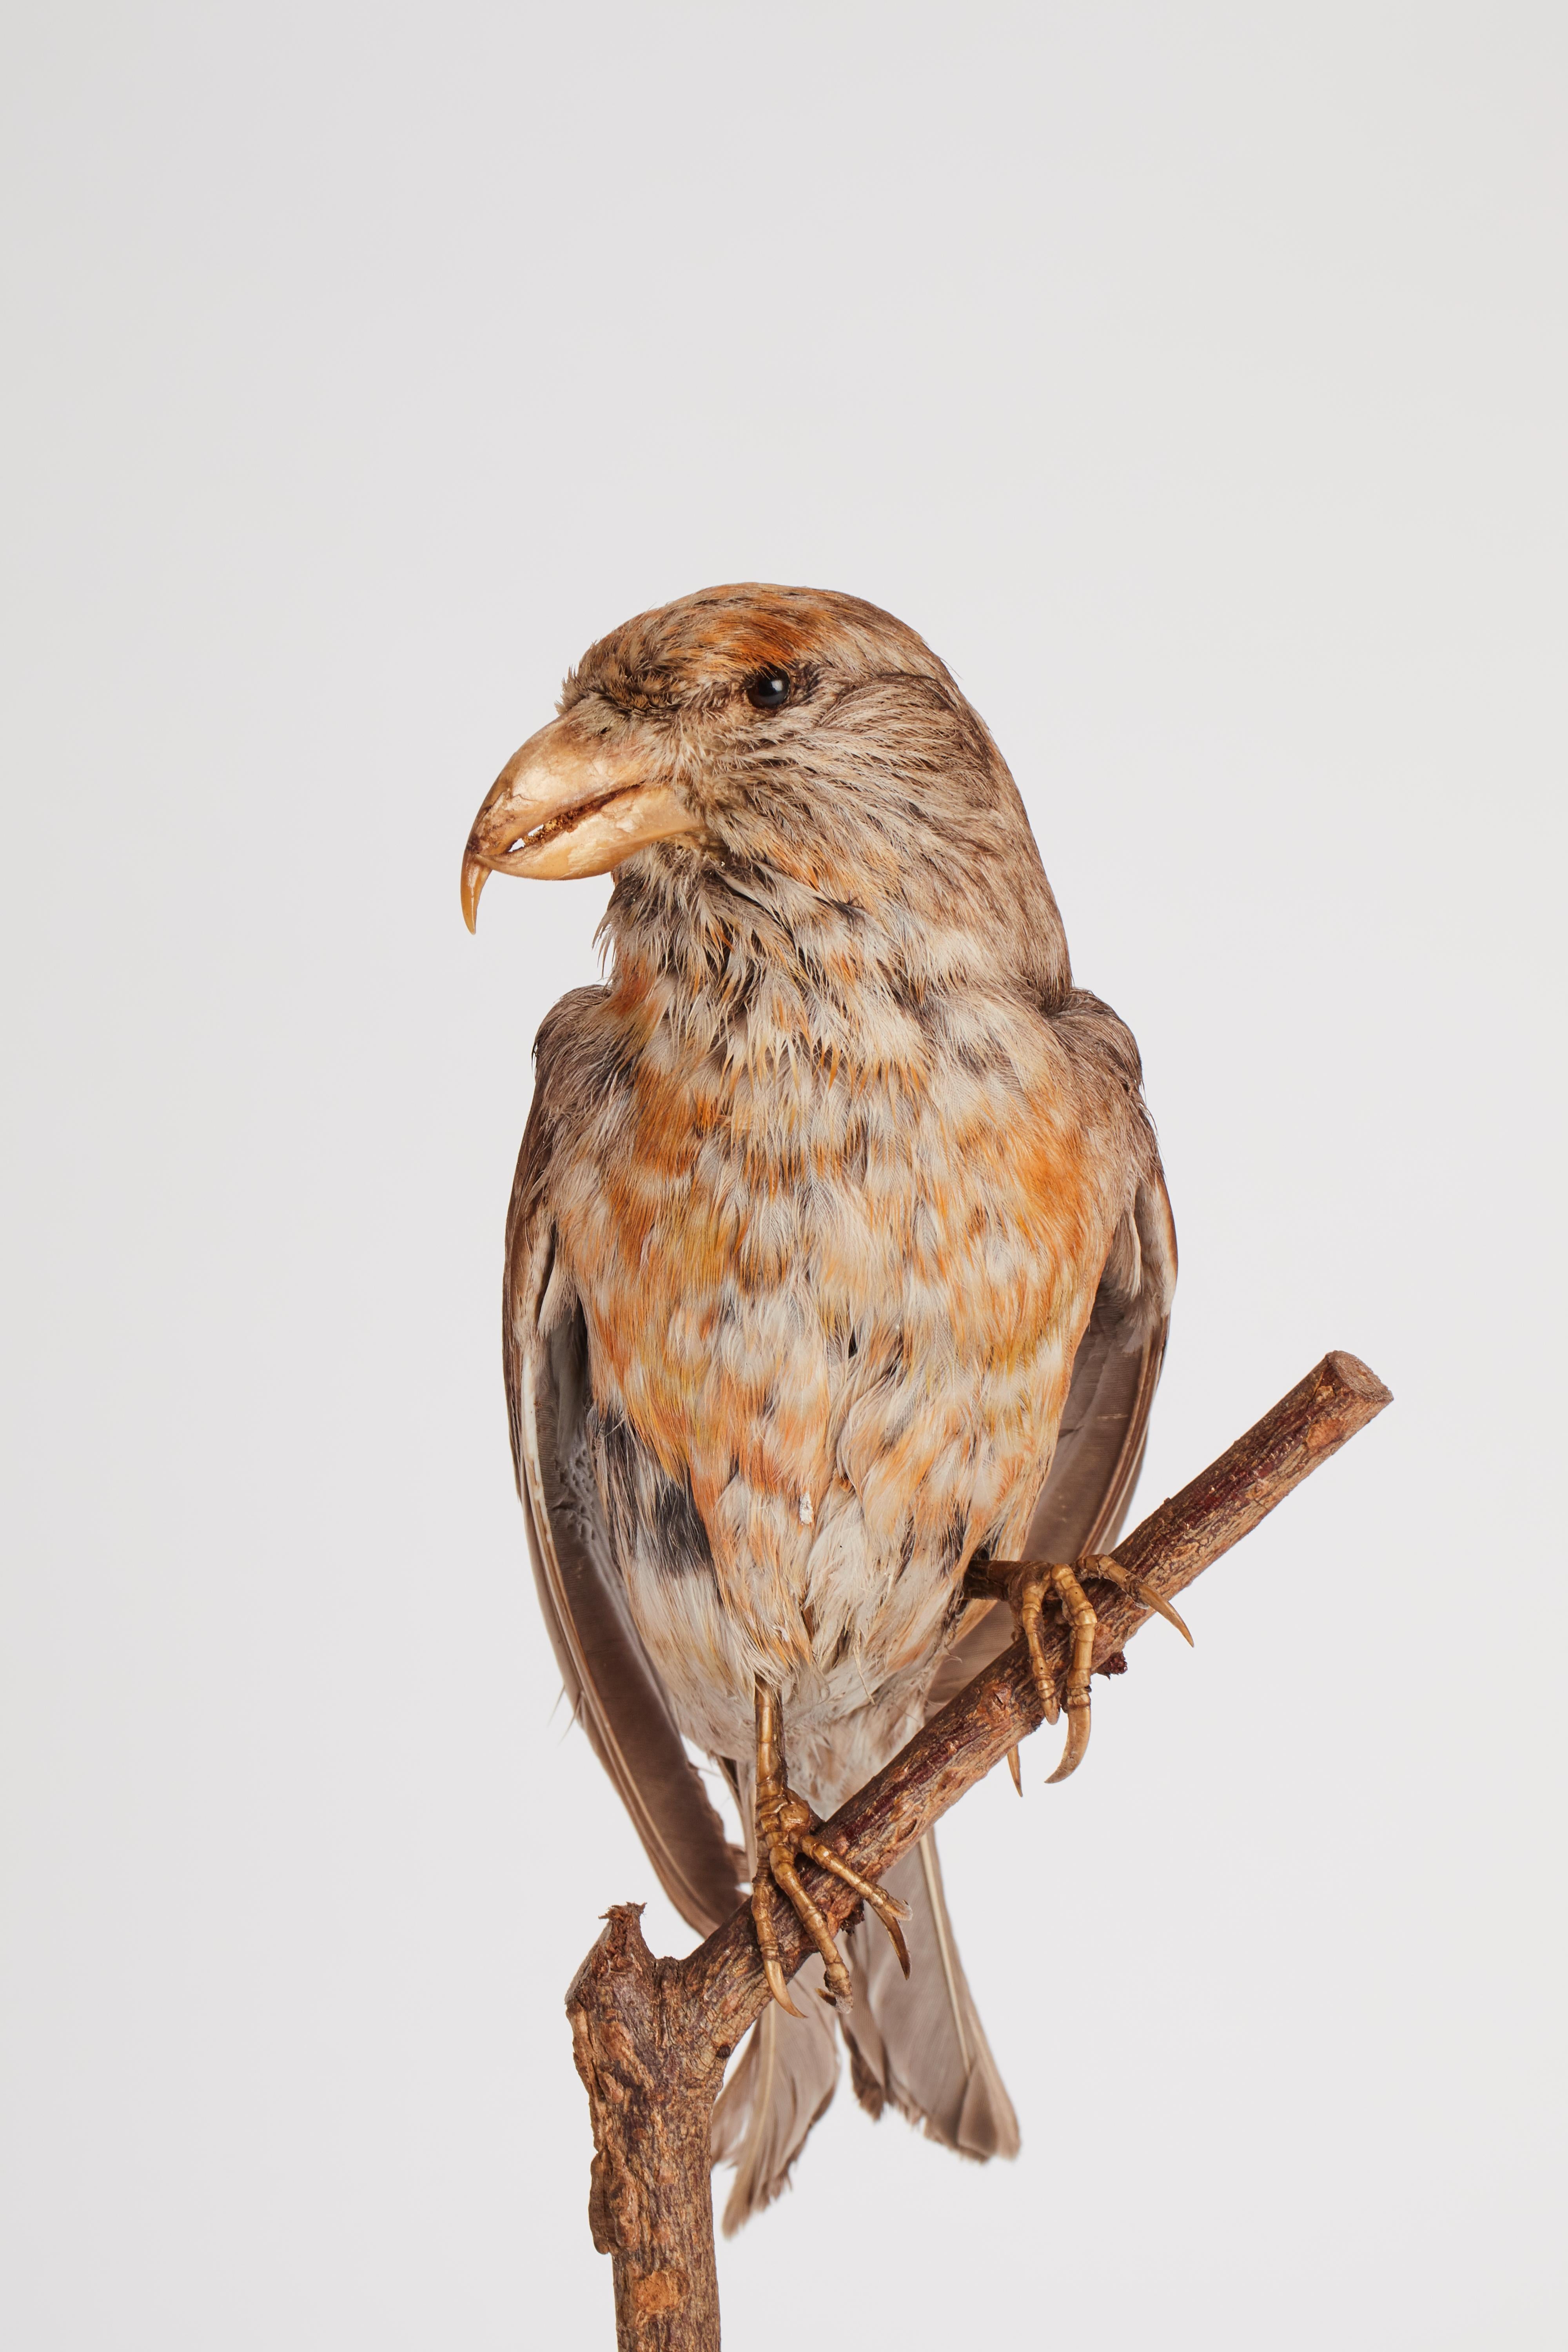 Natural specimen from Wunderkammer stuffed bird (Passer domesticus) house sparrow mounted on a wooden base with cartouche specimen for laboratory and natural history cabinet. S. Brogi Naturalista. Siena, Italy, circa 1880.